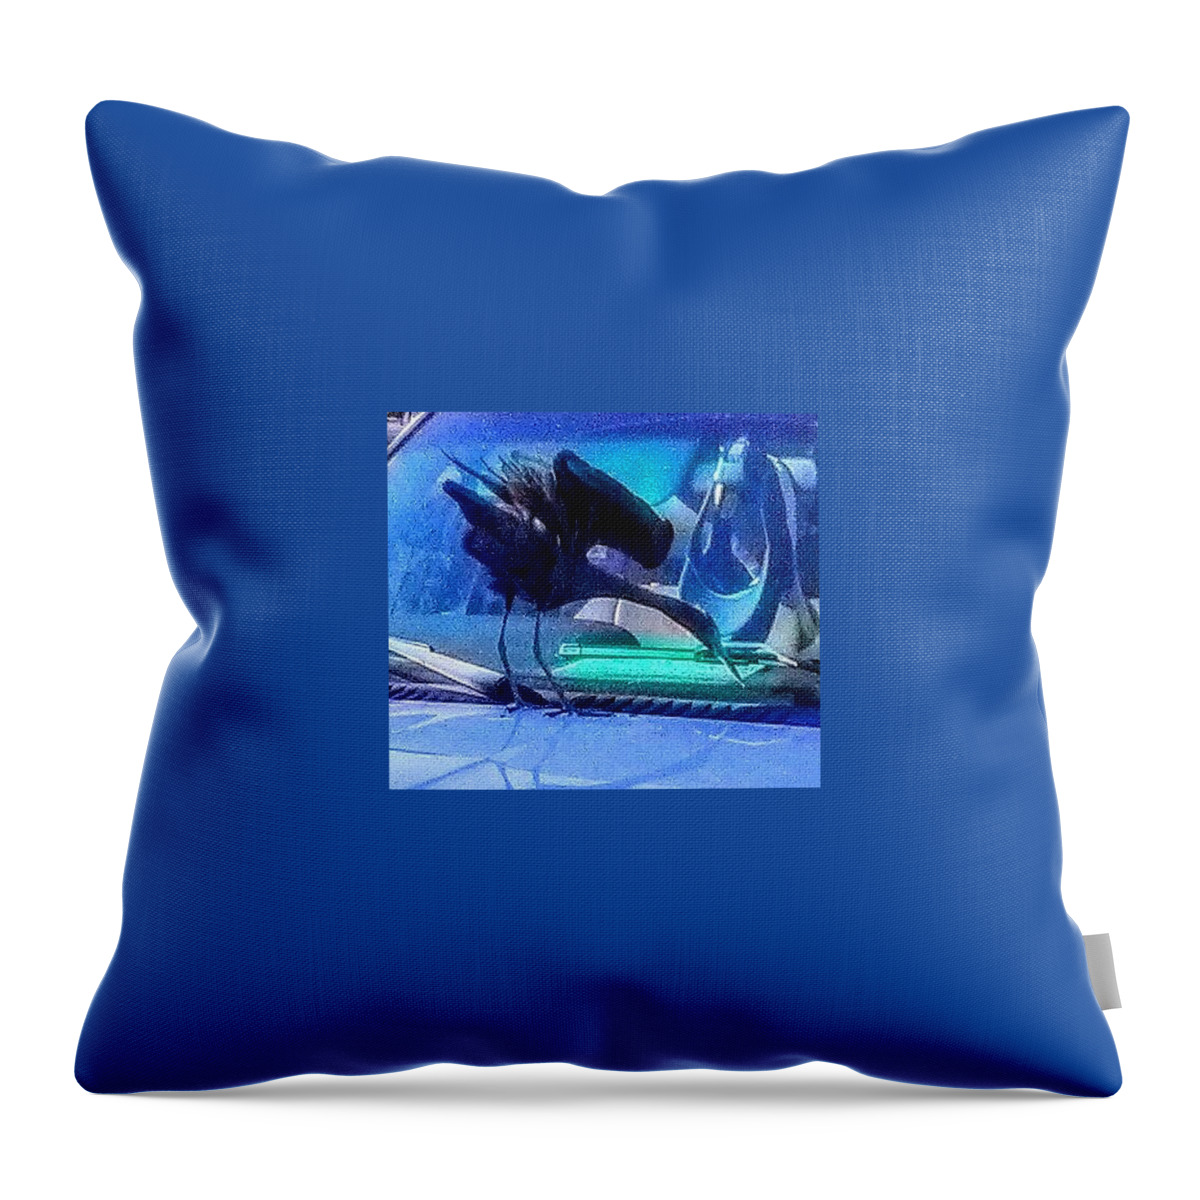 Bird Throw Pillow featuring the photograph Blue Heron Before Takeoff by Suzanne Berthier